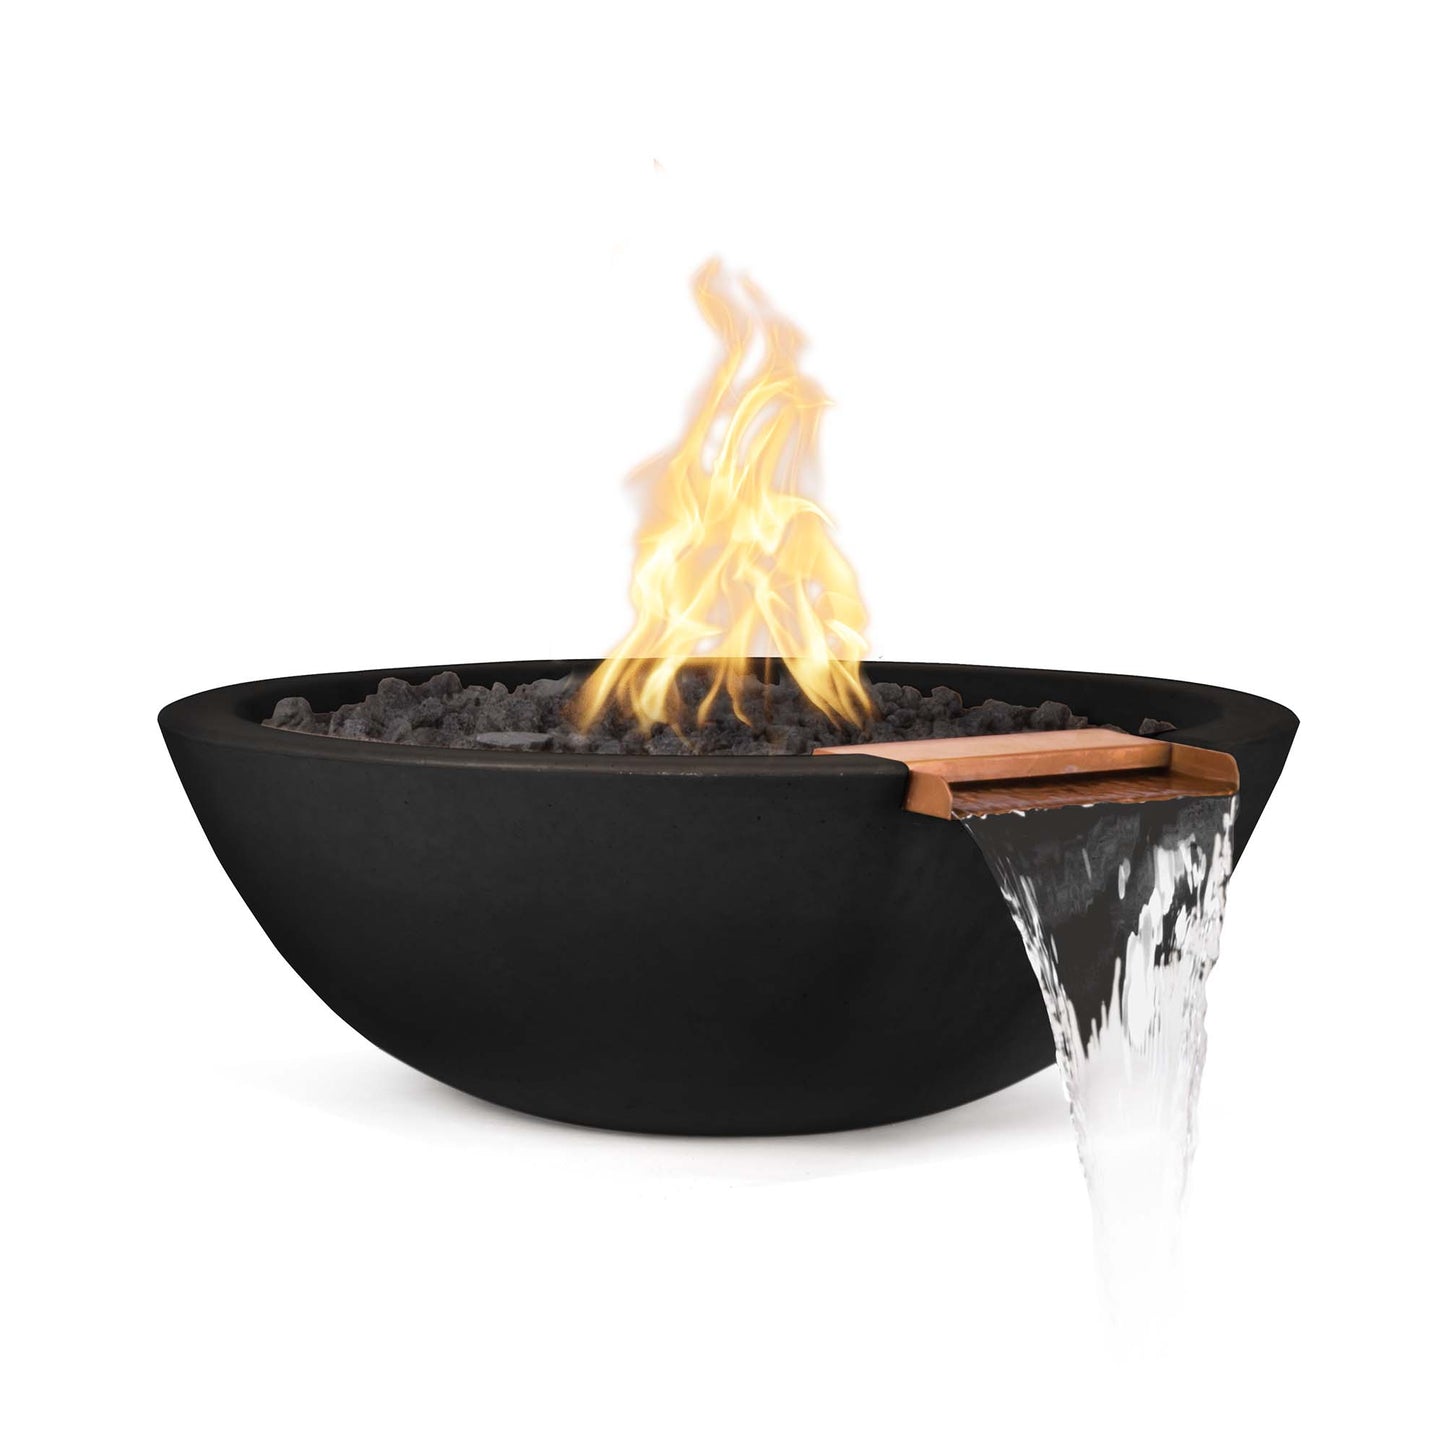 The Outdoor Plus Round Sedona 33" Chocolate GFRC Concrete Liquid Propane Fire & Water Bowl with Match Lit with Flame Sense Ignition